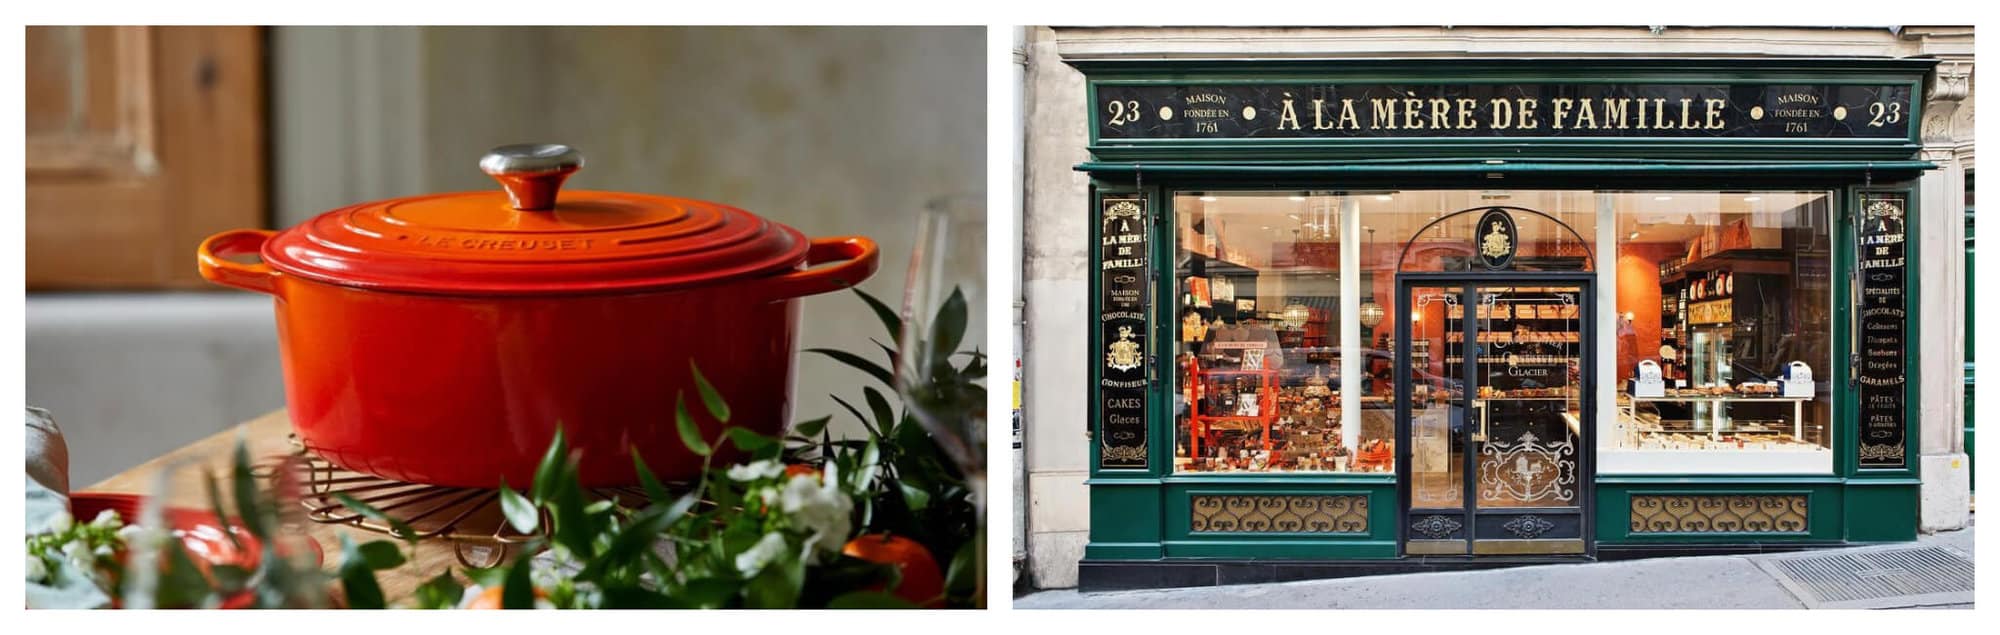 Left: a dutch oval casserole with herbs surrounding it. Right: A store-front with green and black decor.